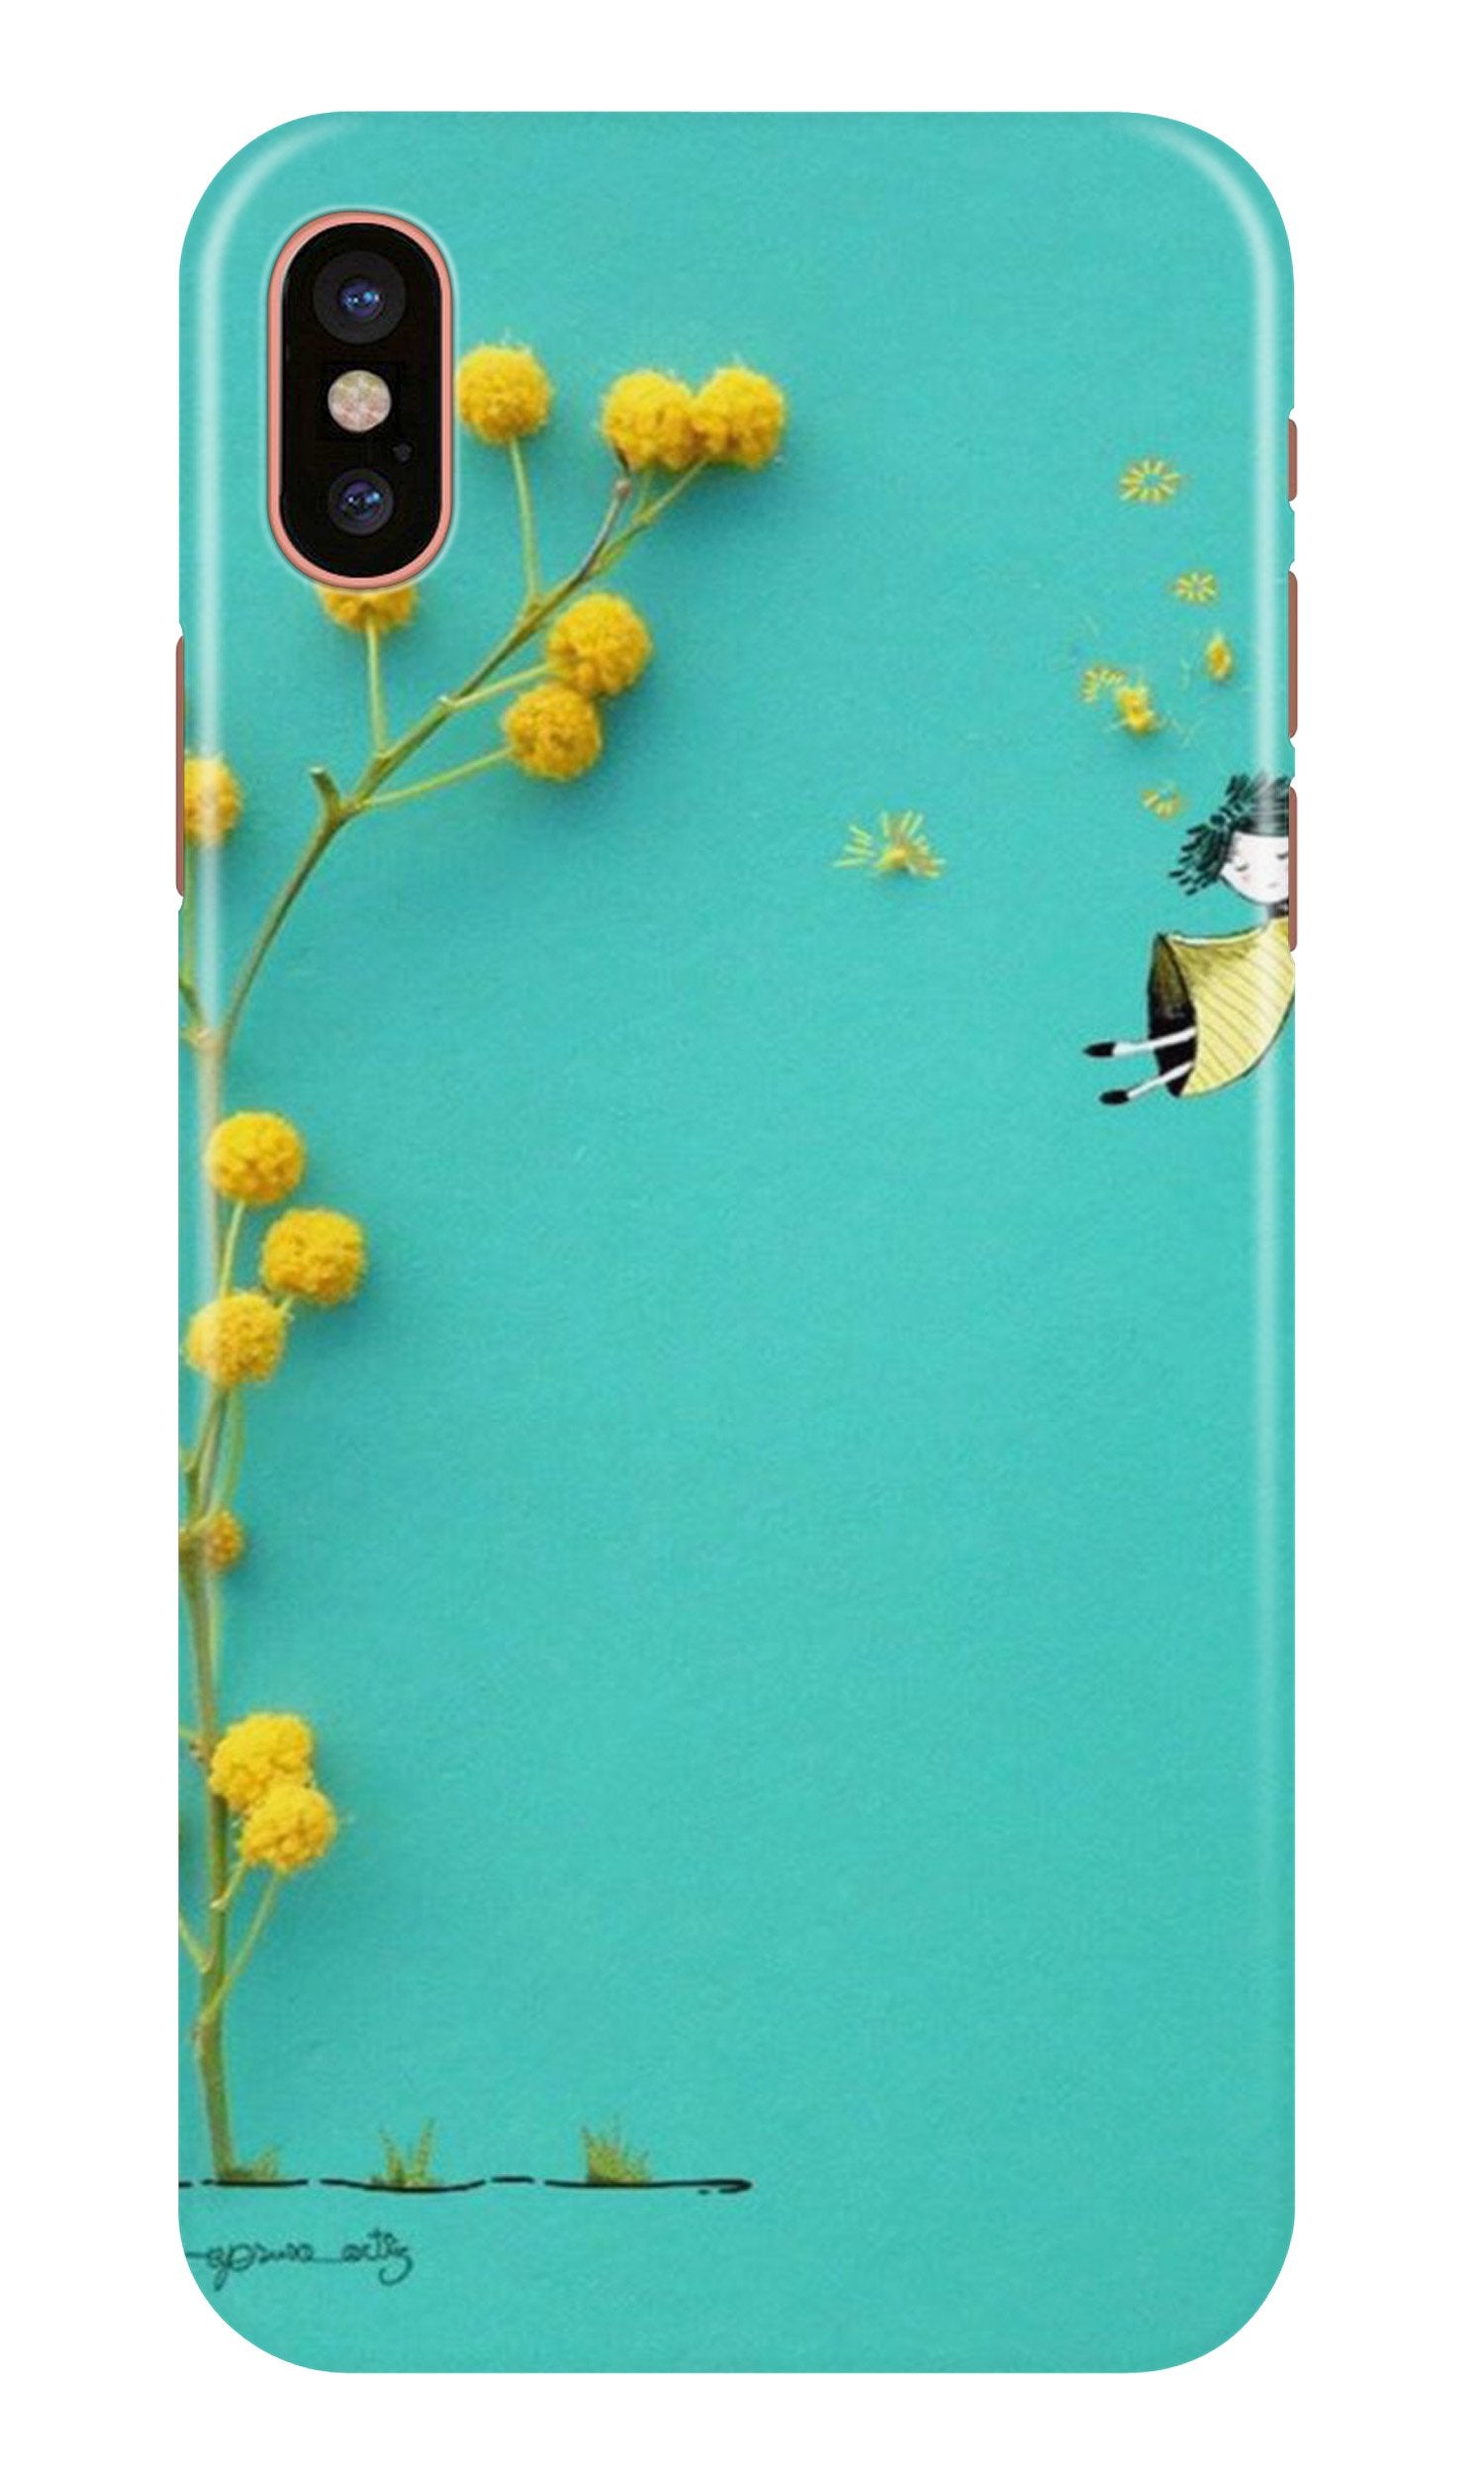 Flowers Girl Case for iPhone Xs Max (Design No. 216)